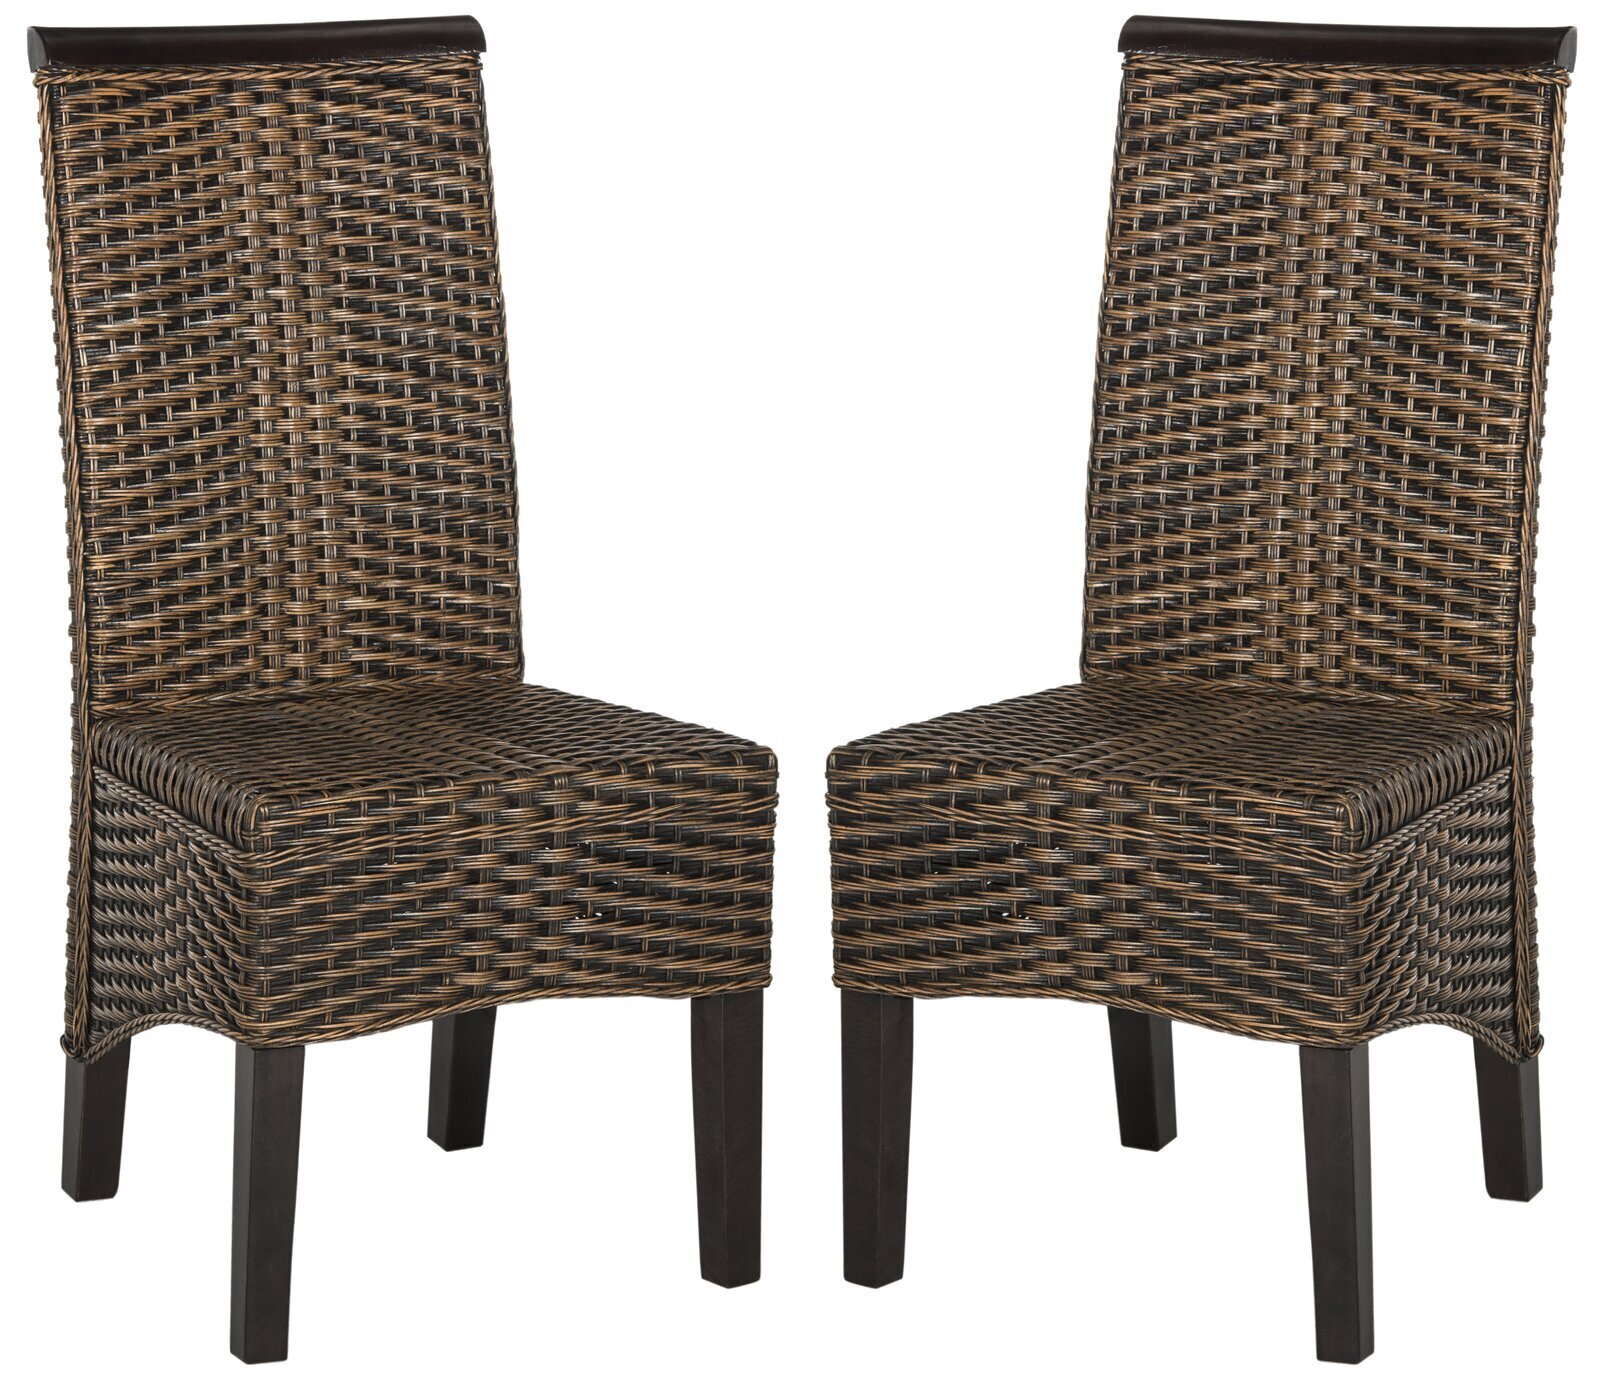 Set Of Two Indoor Wicker Dining Chairs